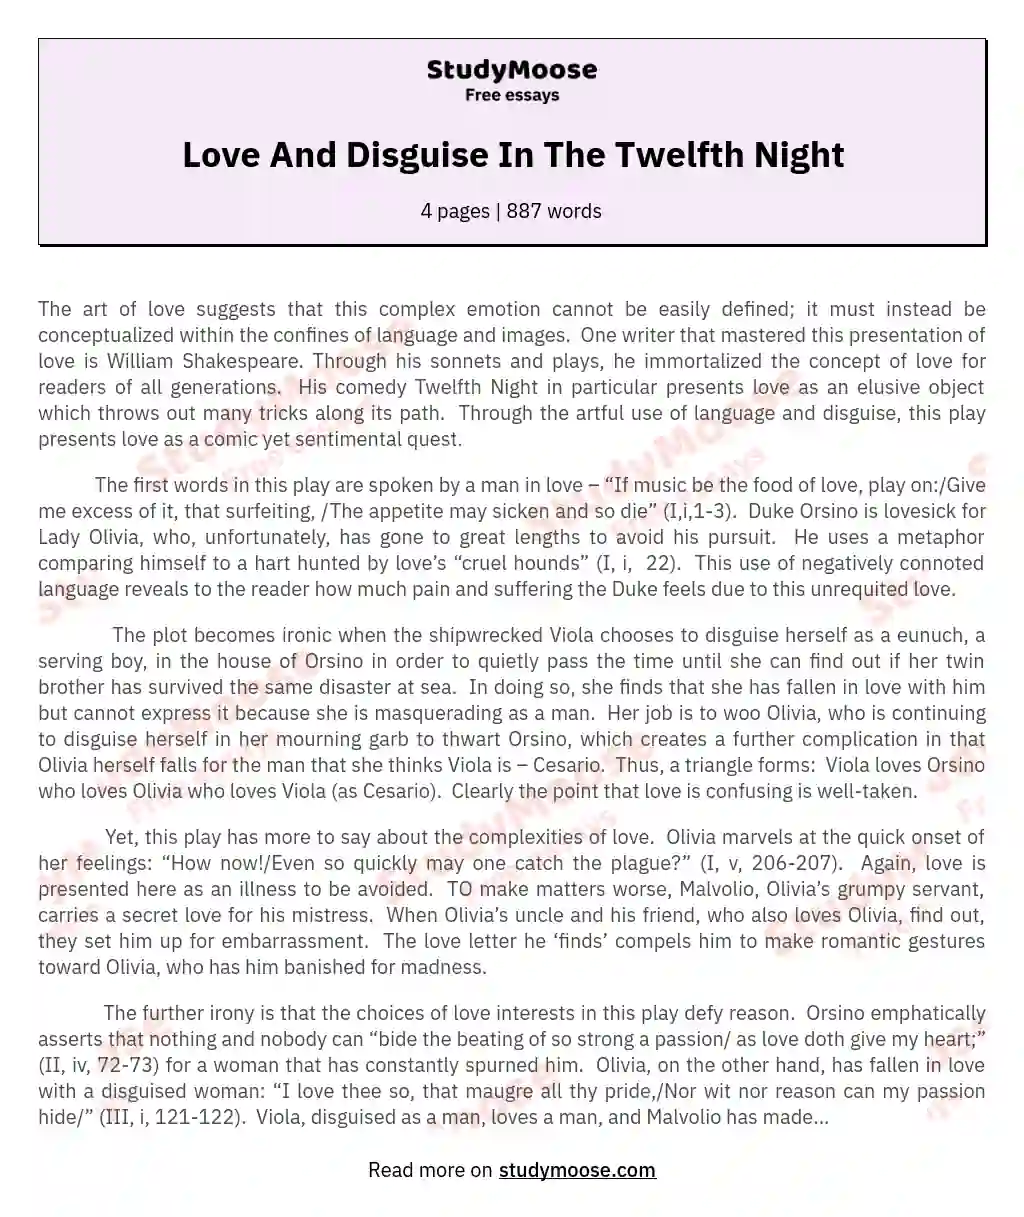 Love And Disguise In The Twelfth Night essay